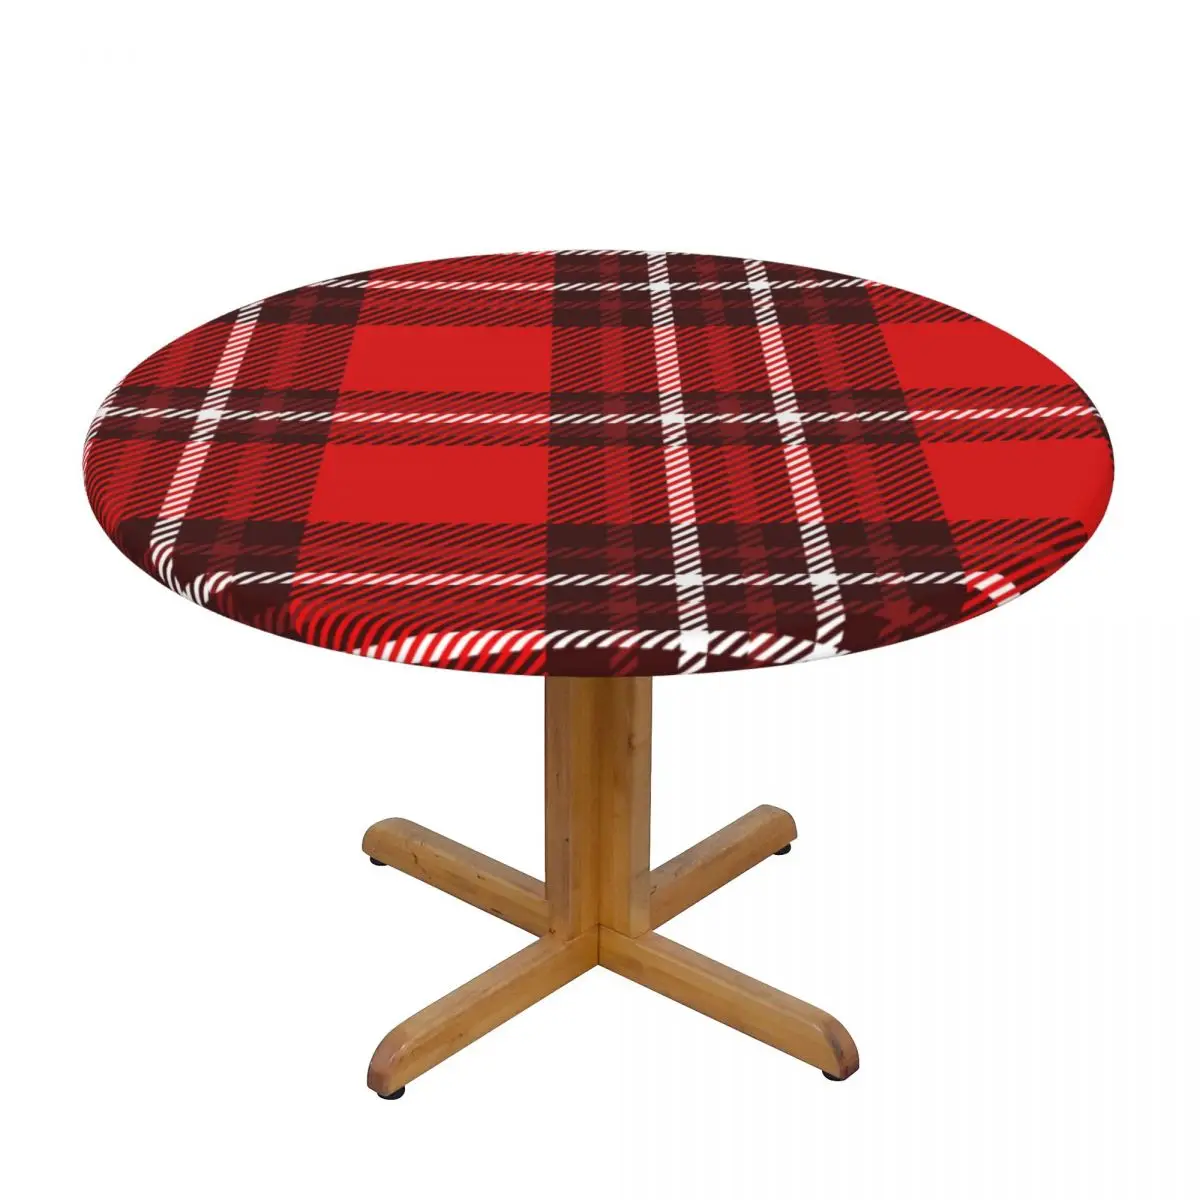 

Red And White Plaid In Burgundy Waterproof Polyester Round Tablecloth Catering Fitted Table Cover with Elastic Edged